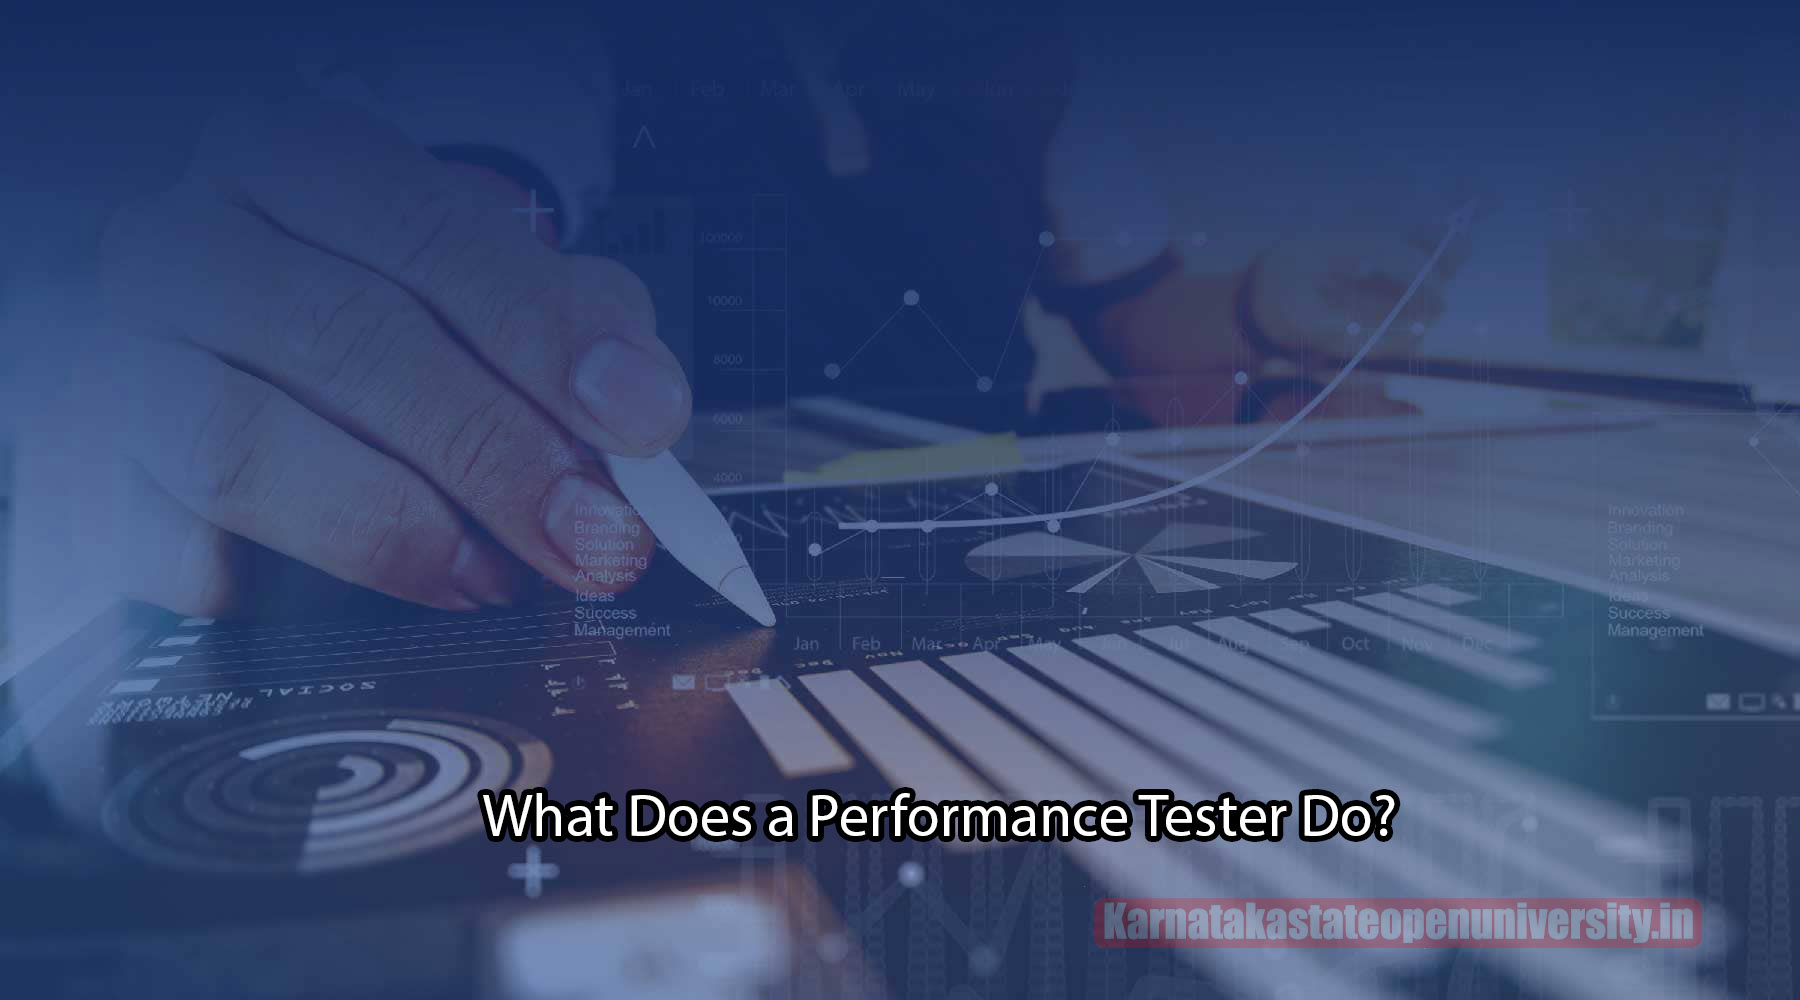 What Does a Performance Tester Do?